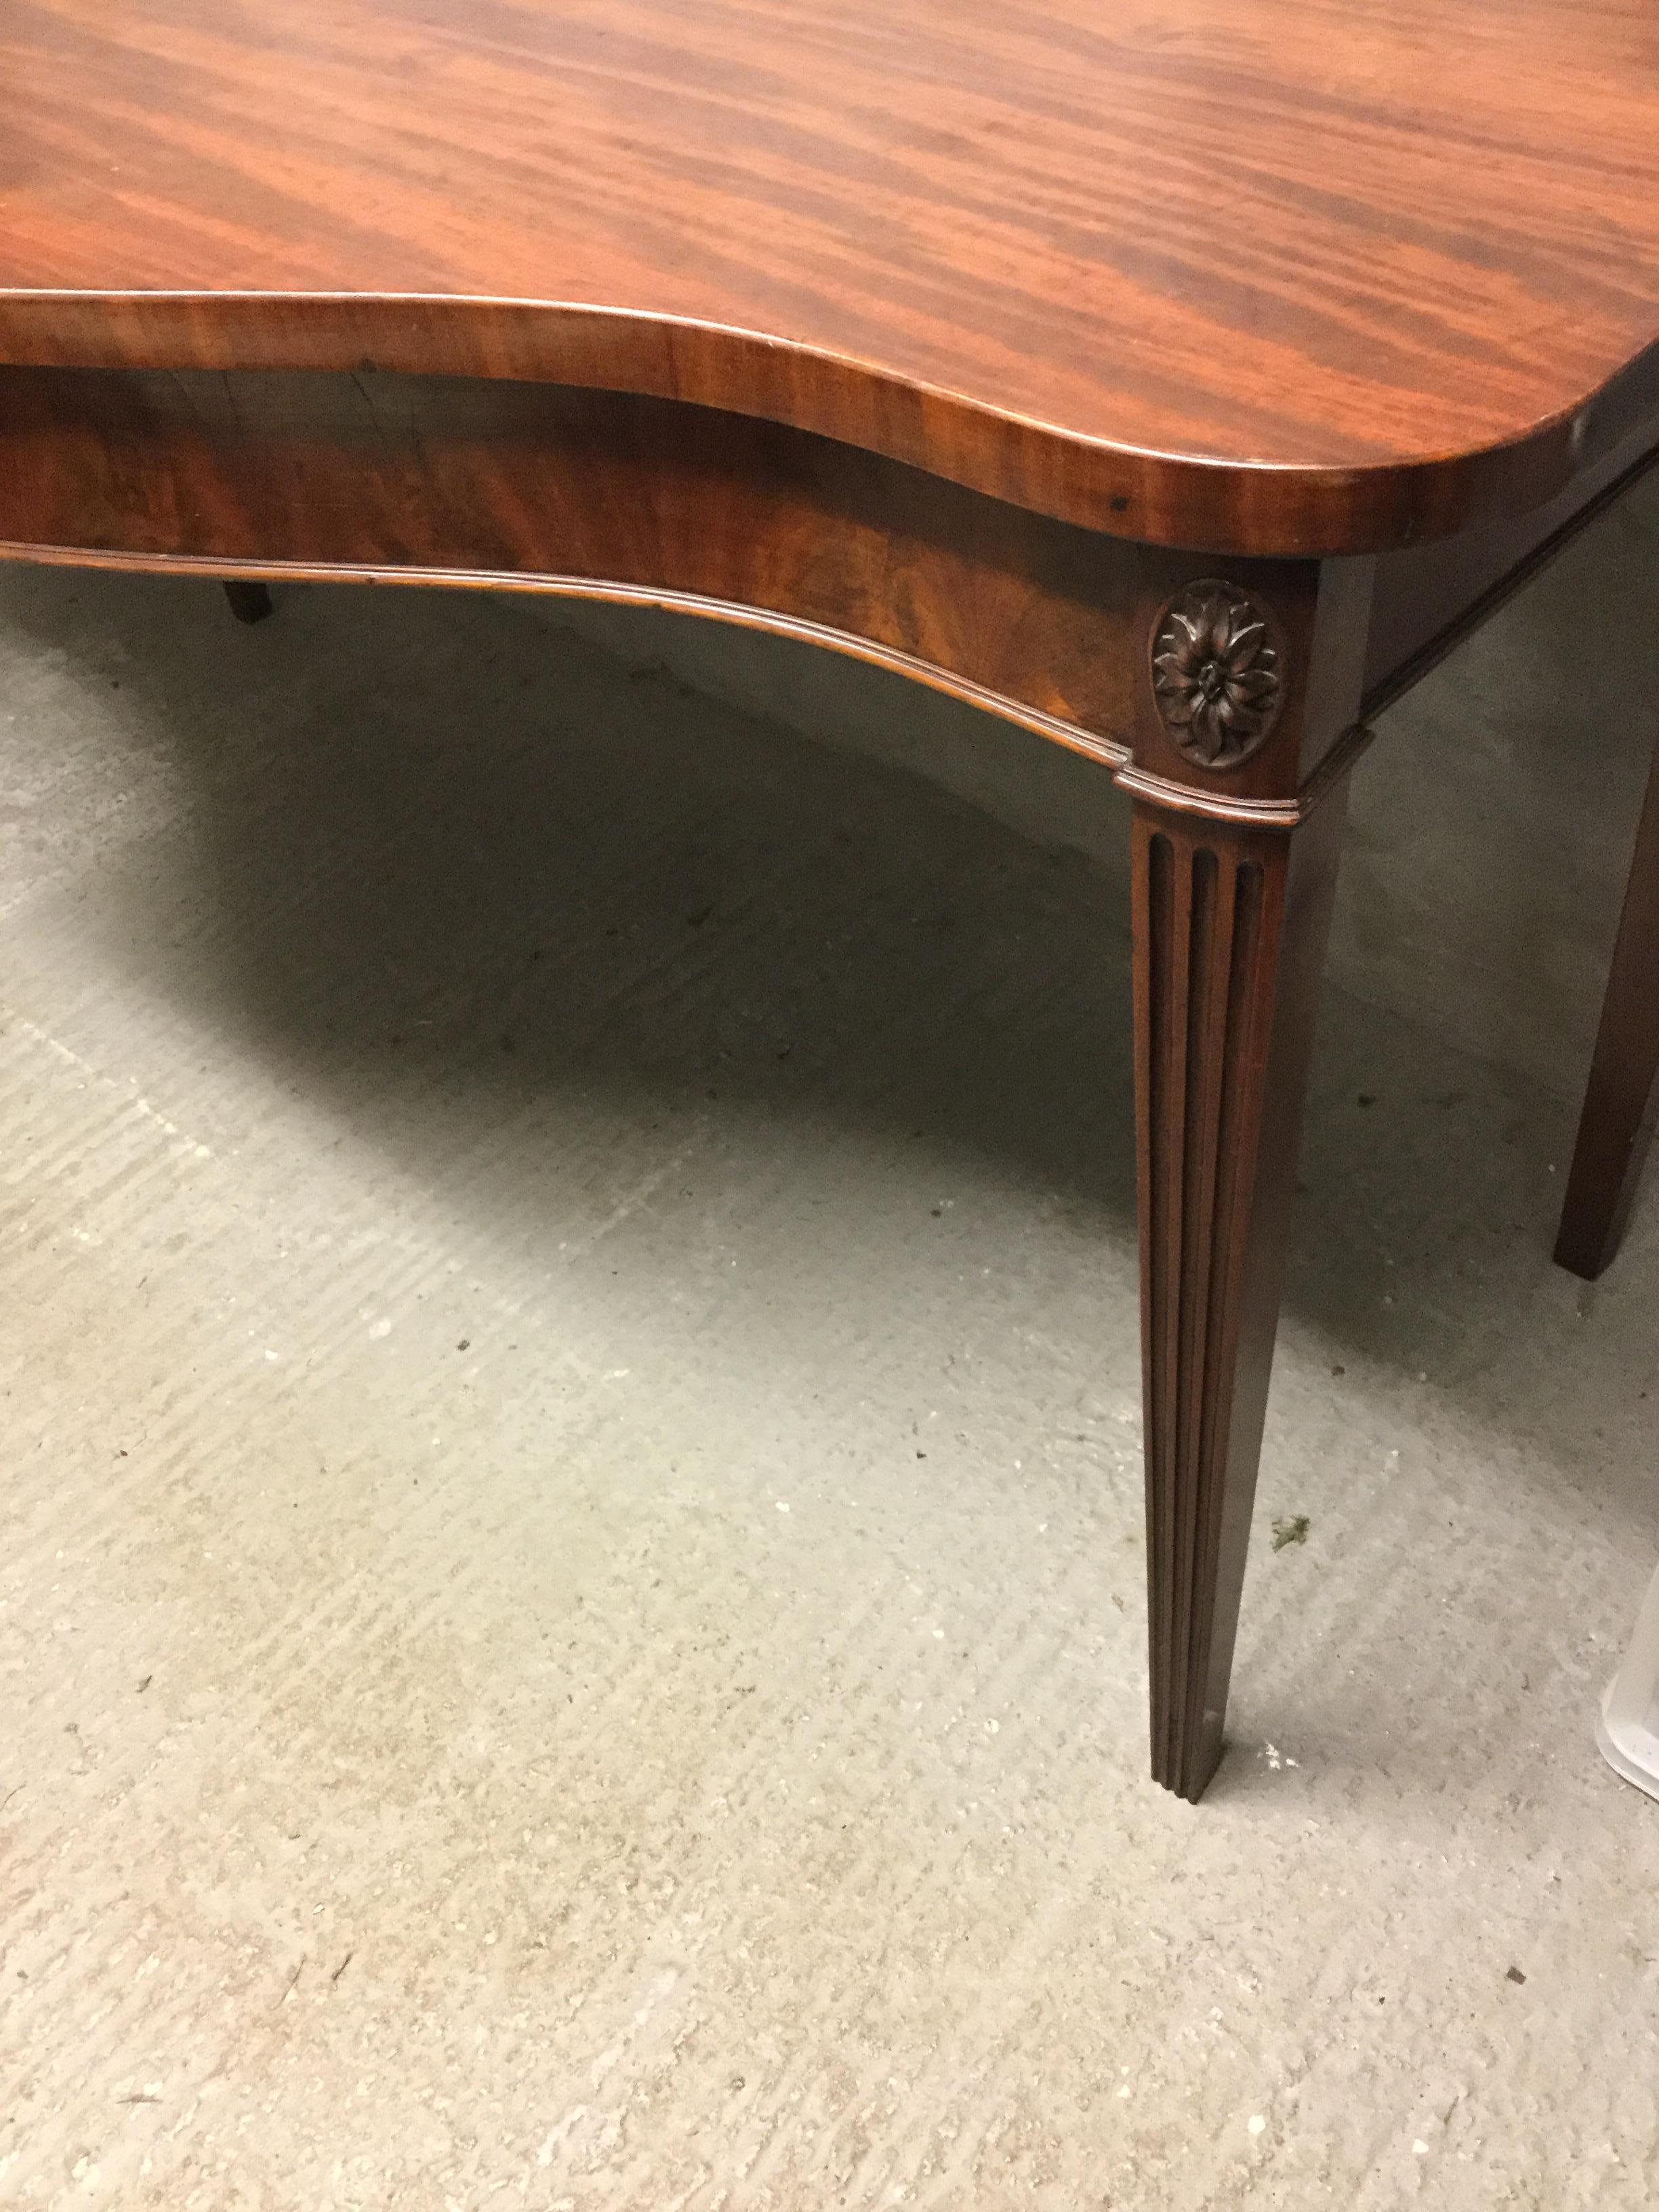 George III Period 18th Century Mahogany Serving Table In Fair Condition For Sale In Bradford on Avon, GB